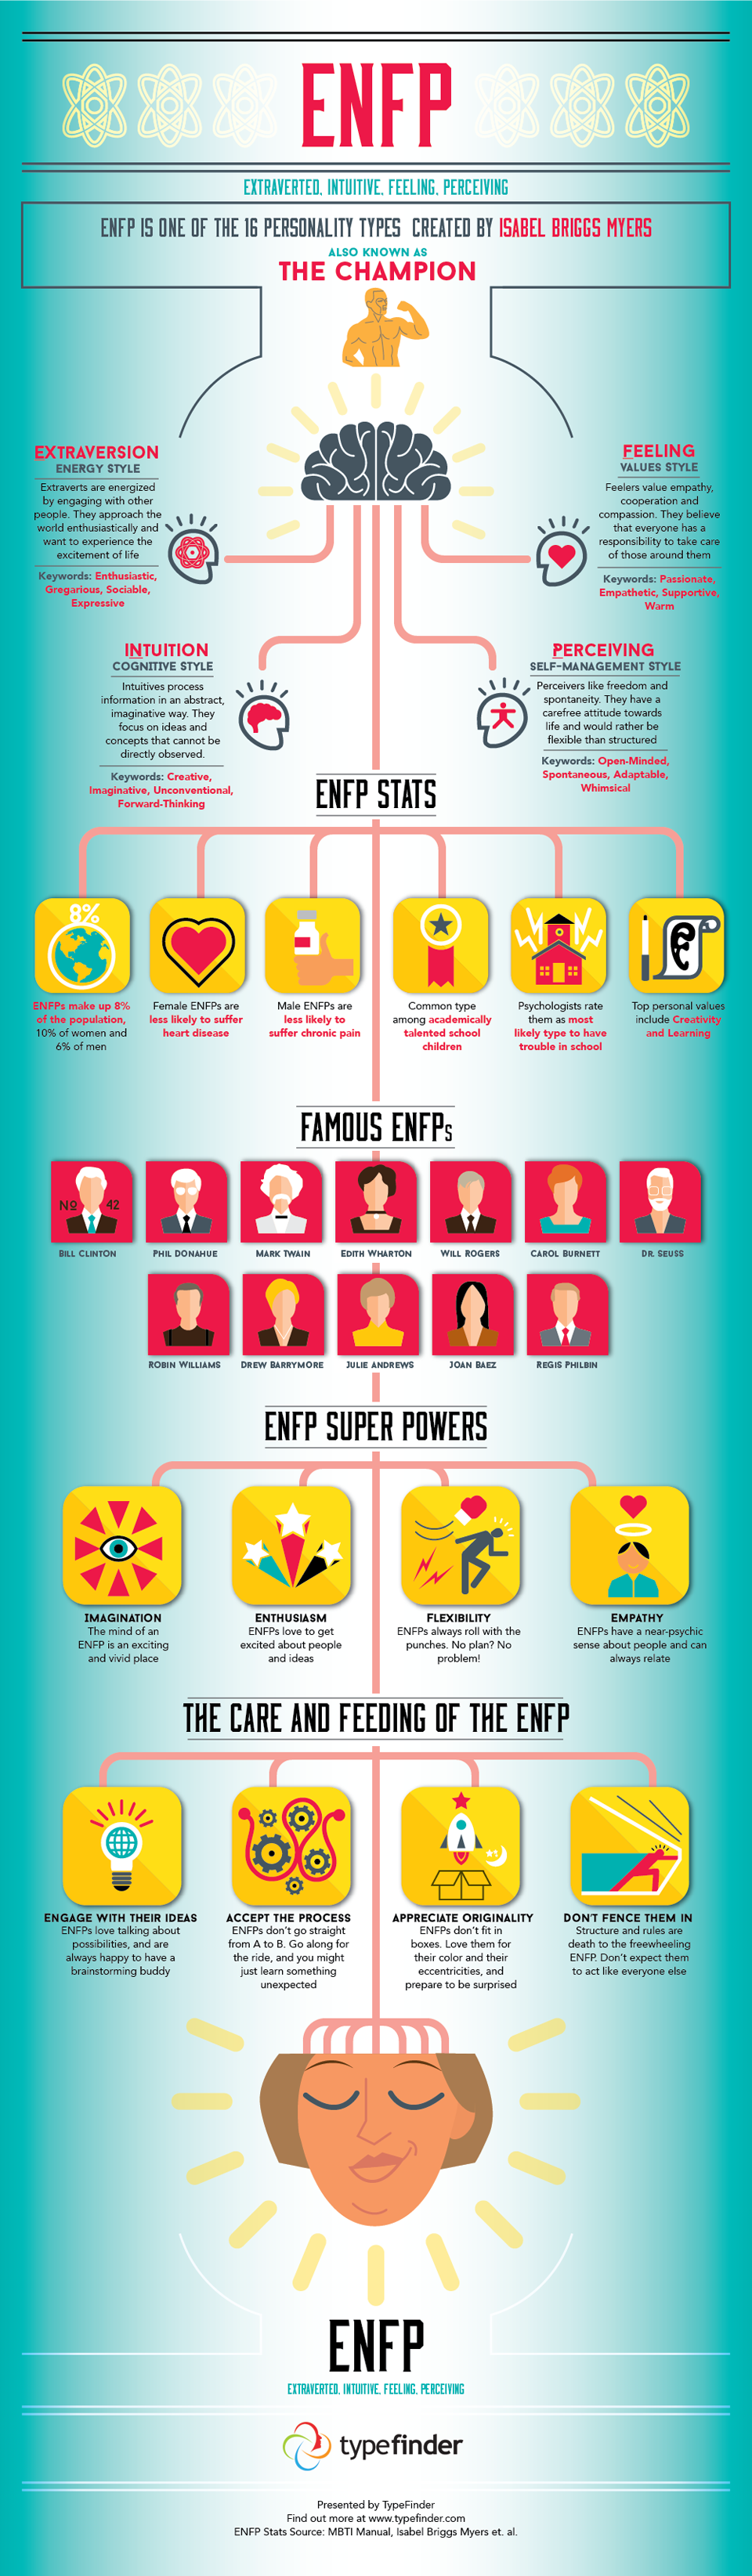 ENFP Infographic – Facts and Stats about the ENFP personality type